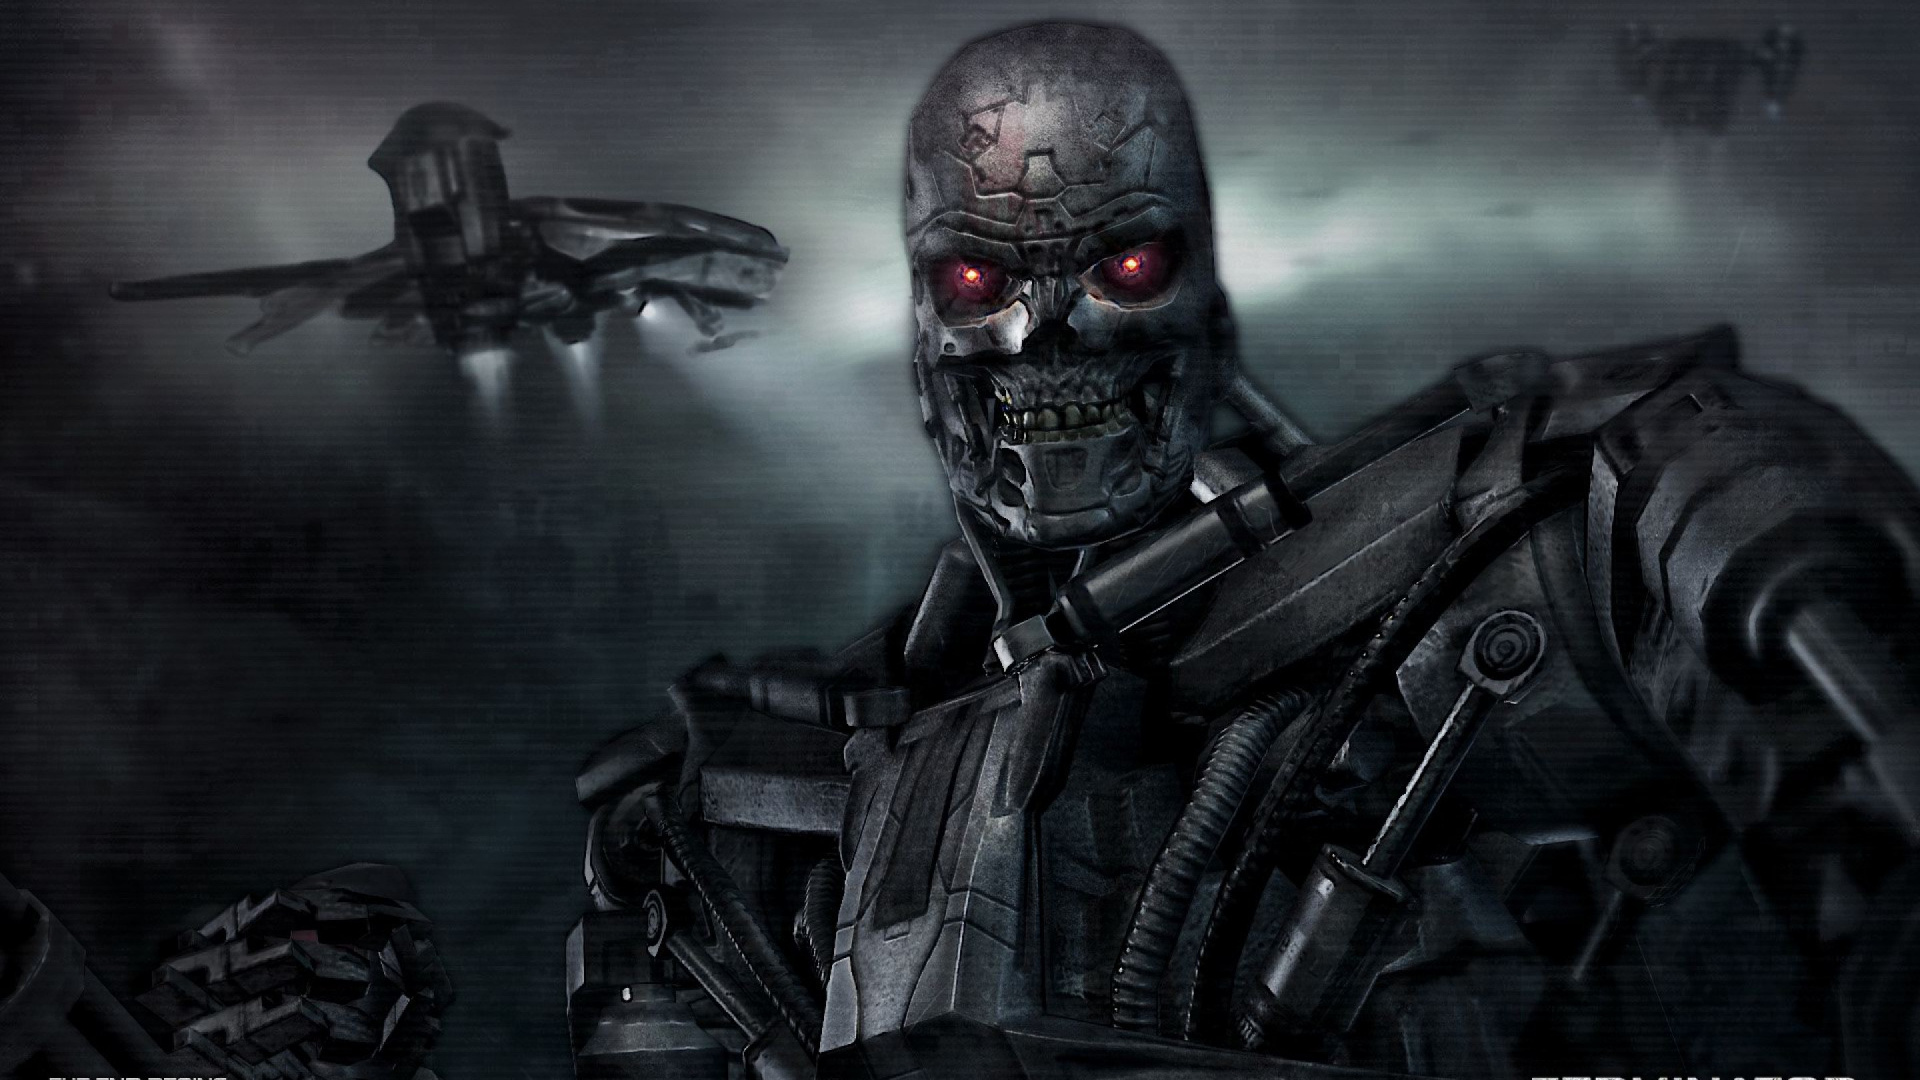 Black and Red Skull With Black and Gray Vest. Wallpaper in 1920x1080 Resolution